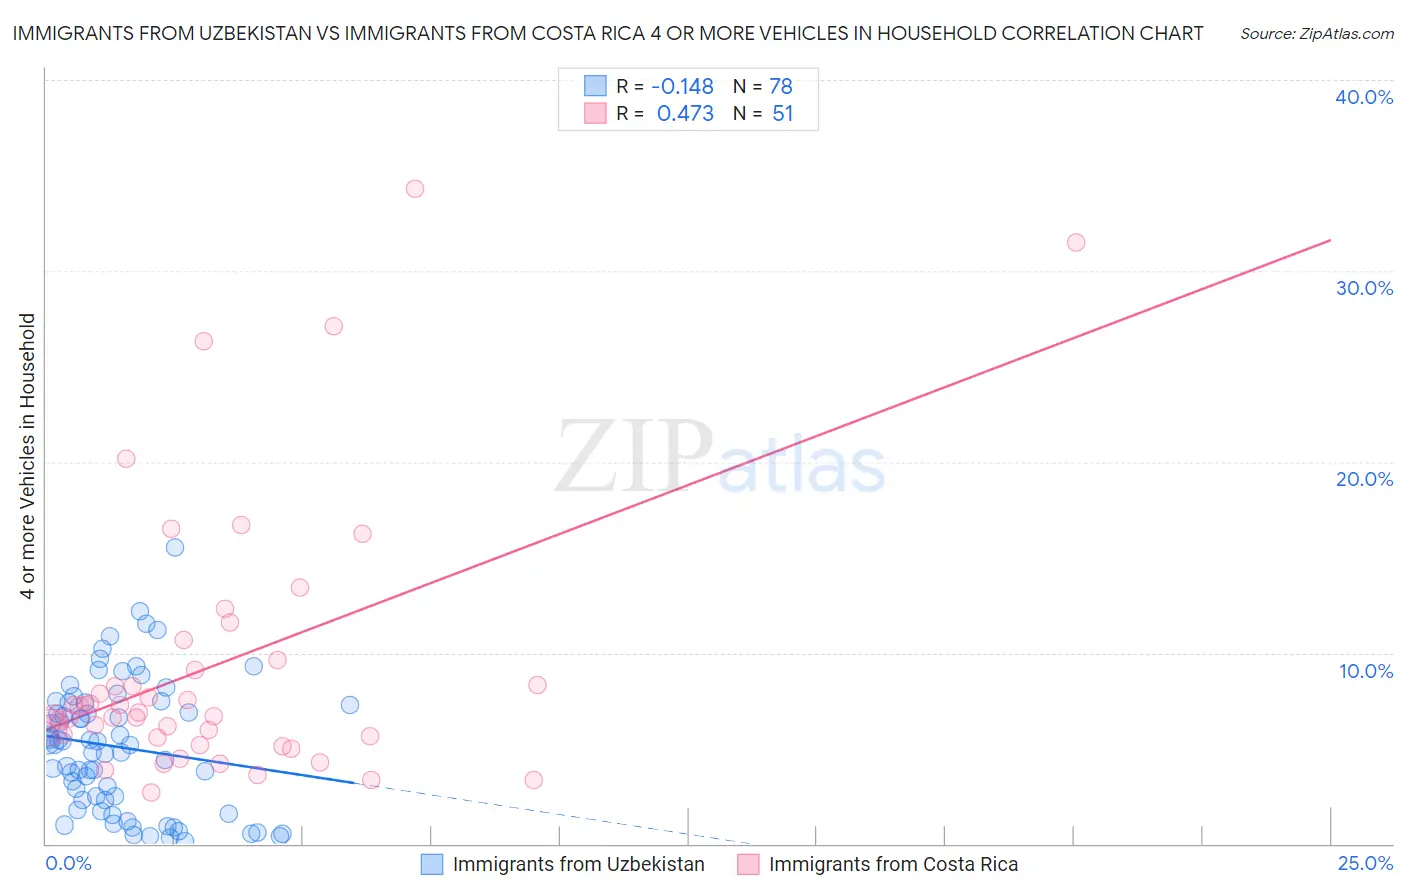 Immigrants from Uzbekistan vs Immigrants from Costa Rica 4 or more Vehicles in Household